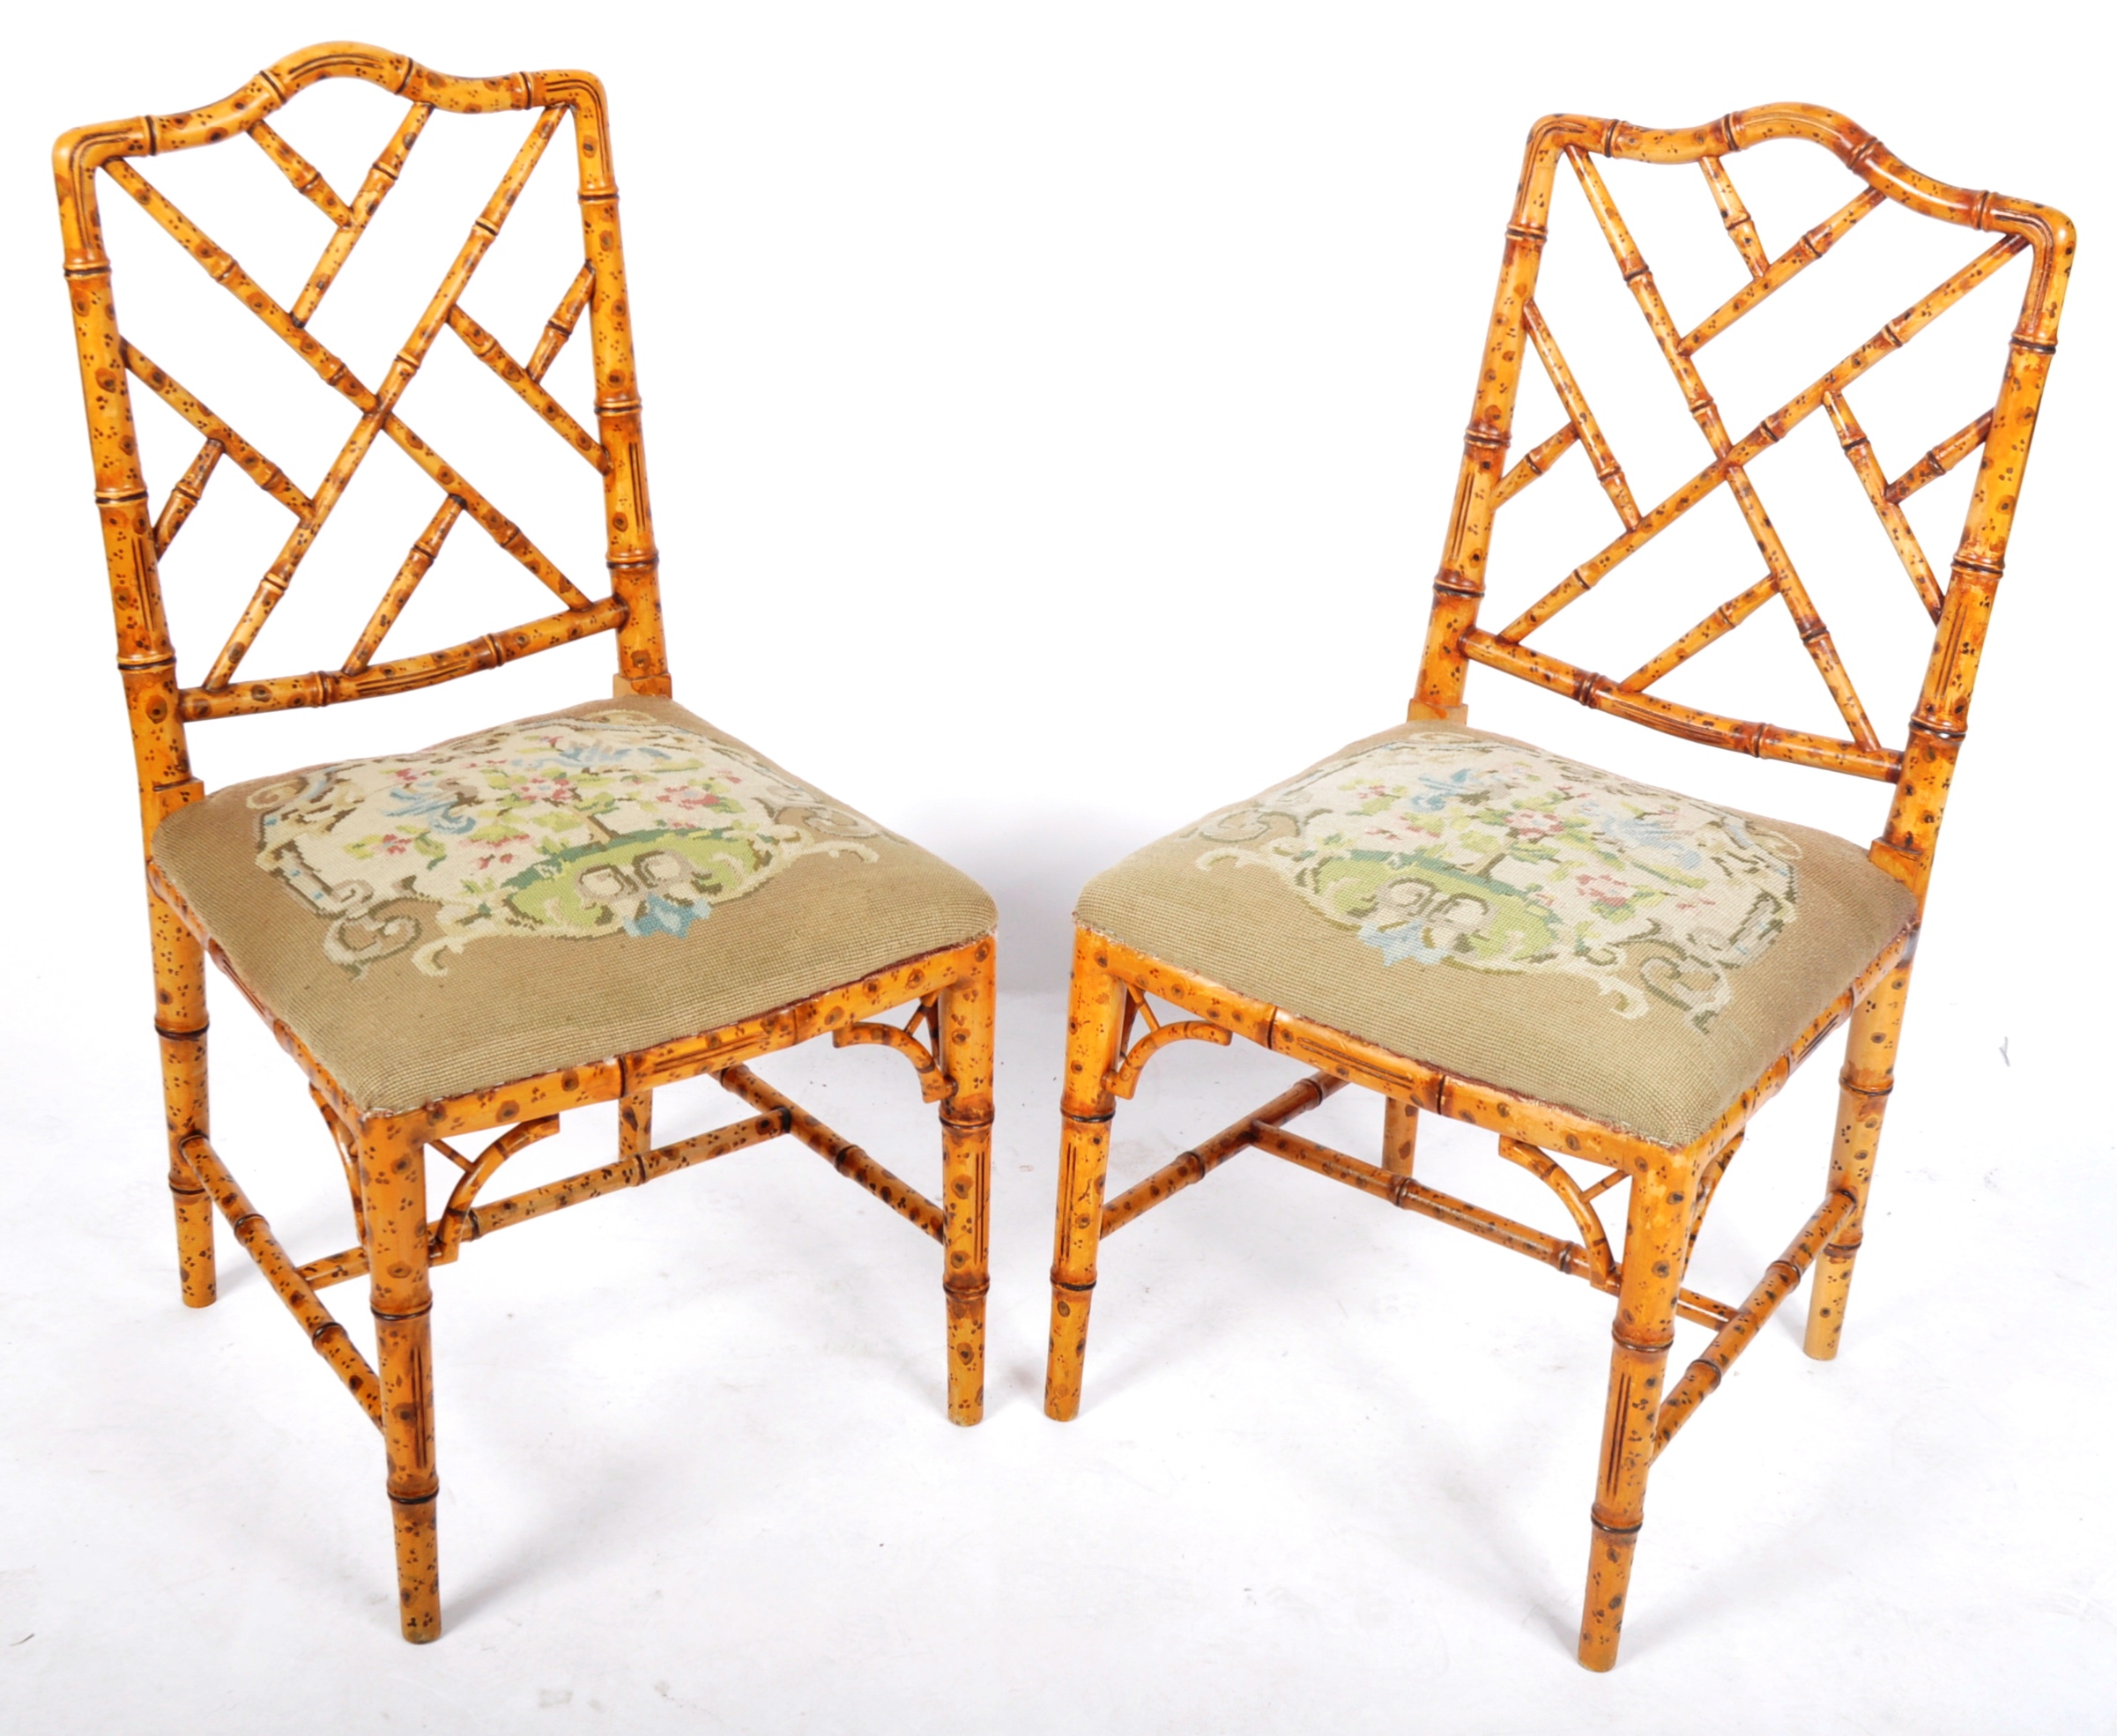 MATCHING PAIR OF 18TH CENTURY STYLE FAUX BAMBOO CHAIRS - Image 2 of 7